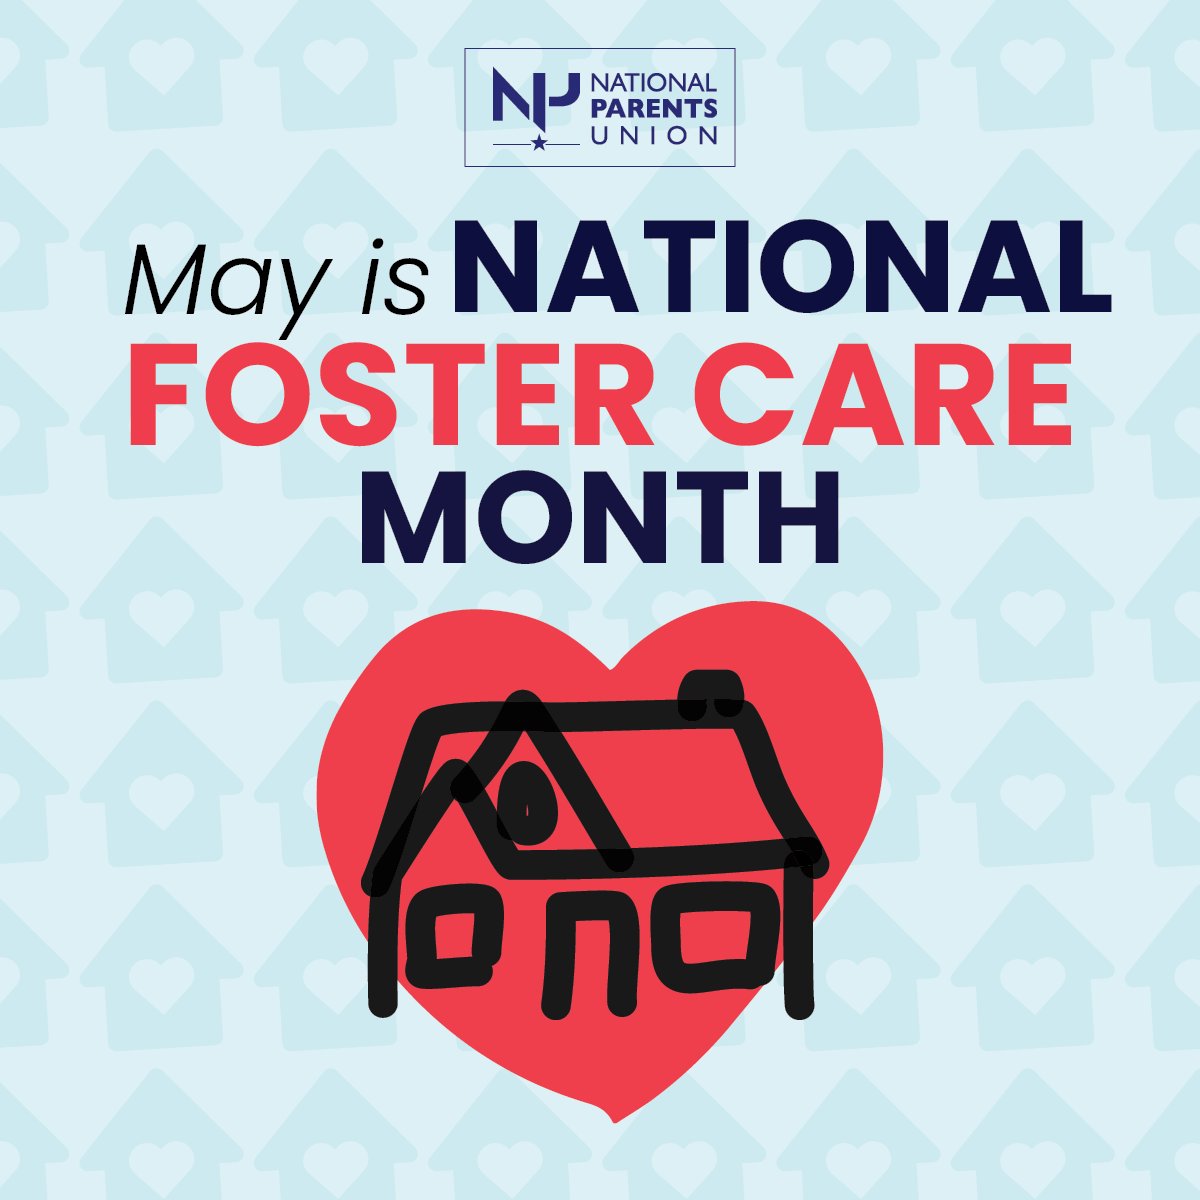 Every child deserves a champion. At @nationalparents we celebrate the amazing foster care families who are nurturing the leaders of tomorrow and cultivating a lifetime of love, new adventures, and possibilities. Happy #FosterCare month!